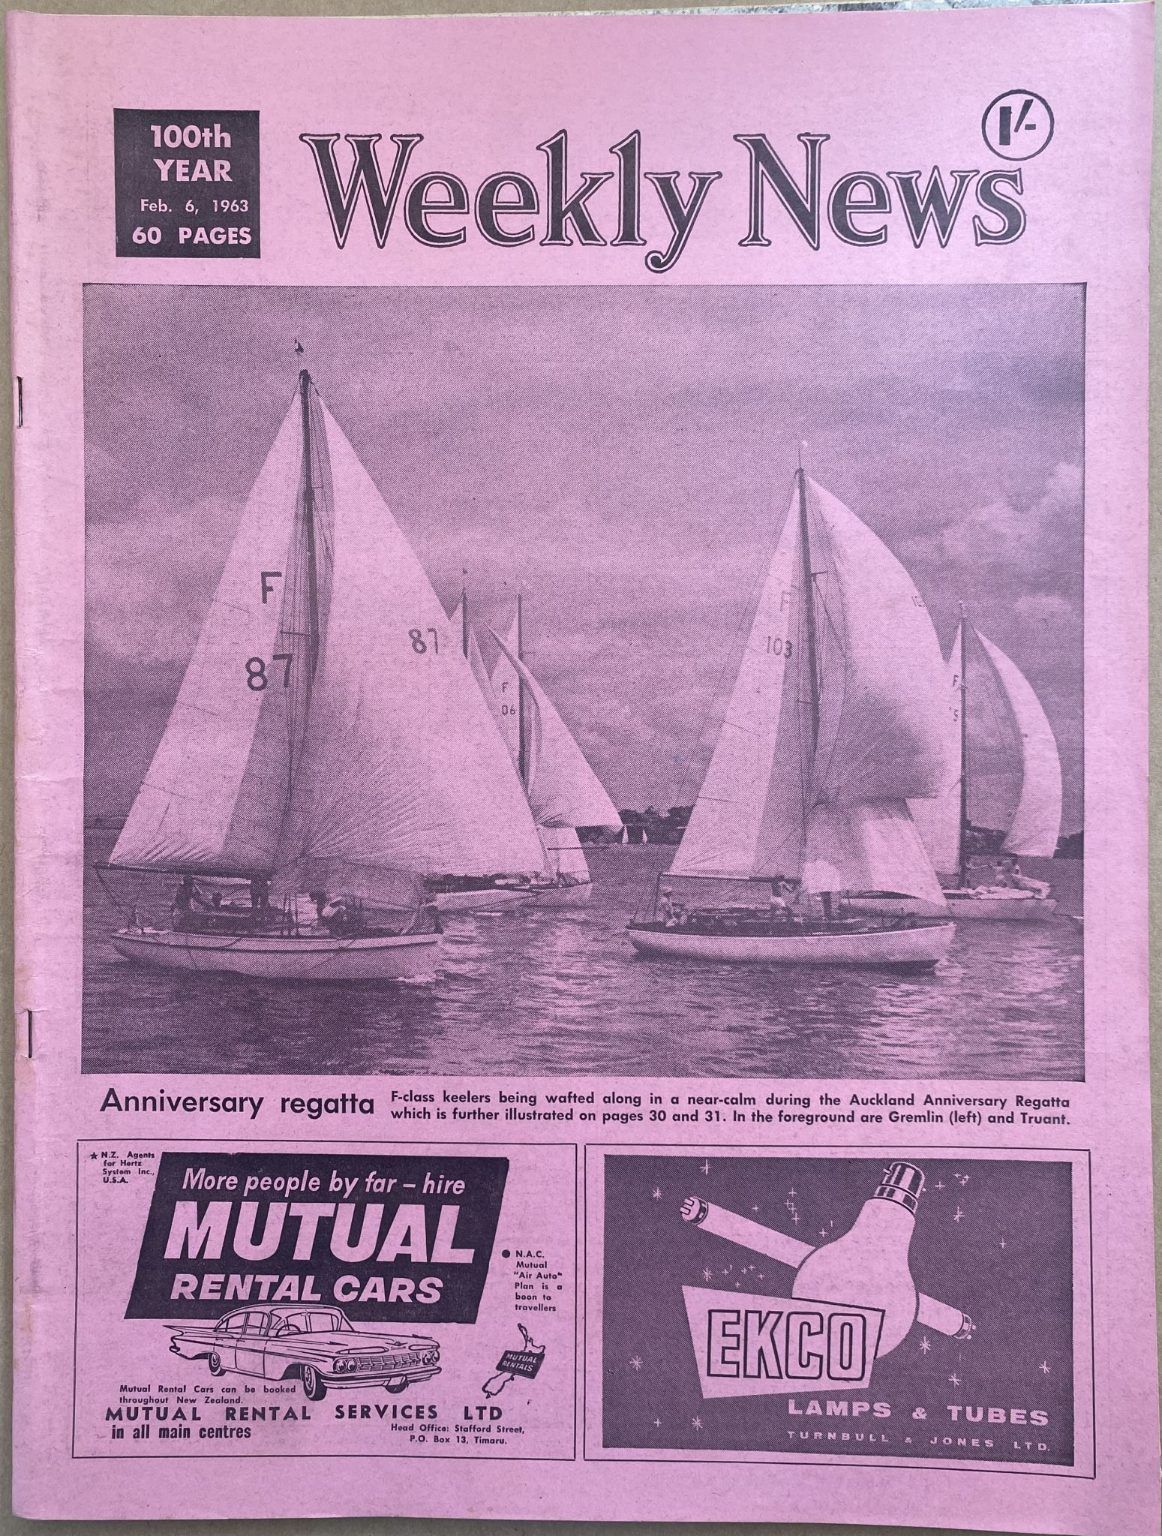 OLD NEWSPAPER: The Weekly News, No. 5176, 6 February 1963